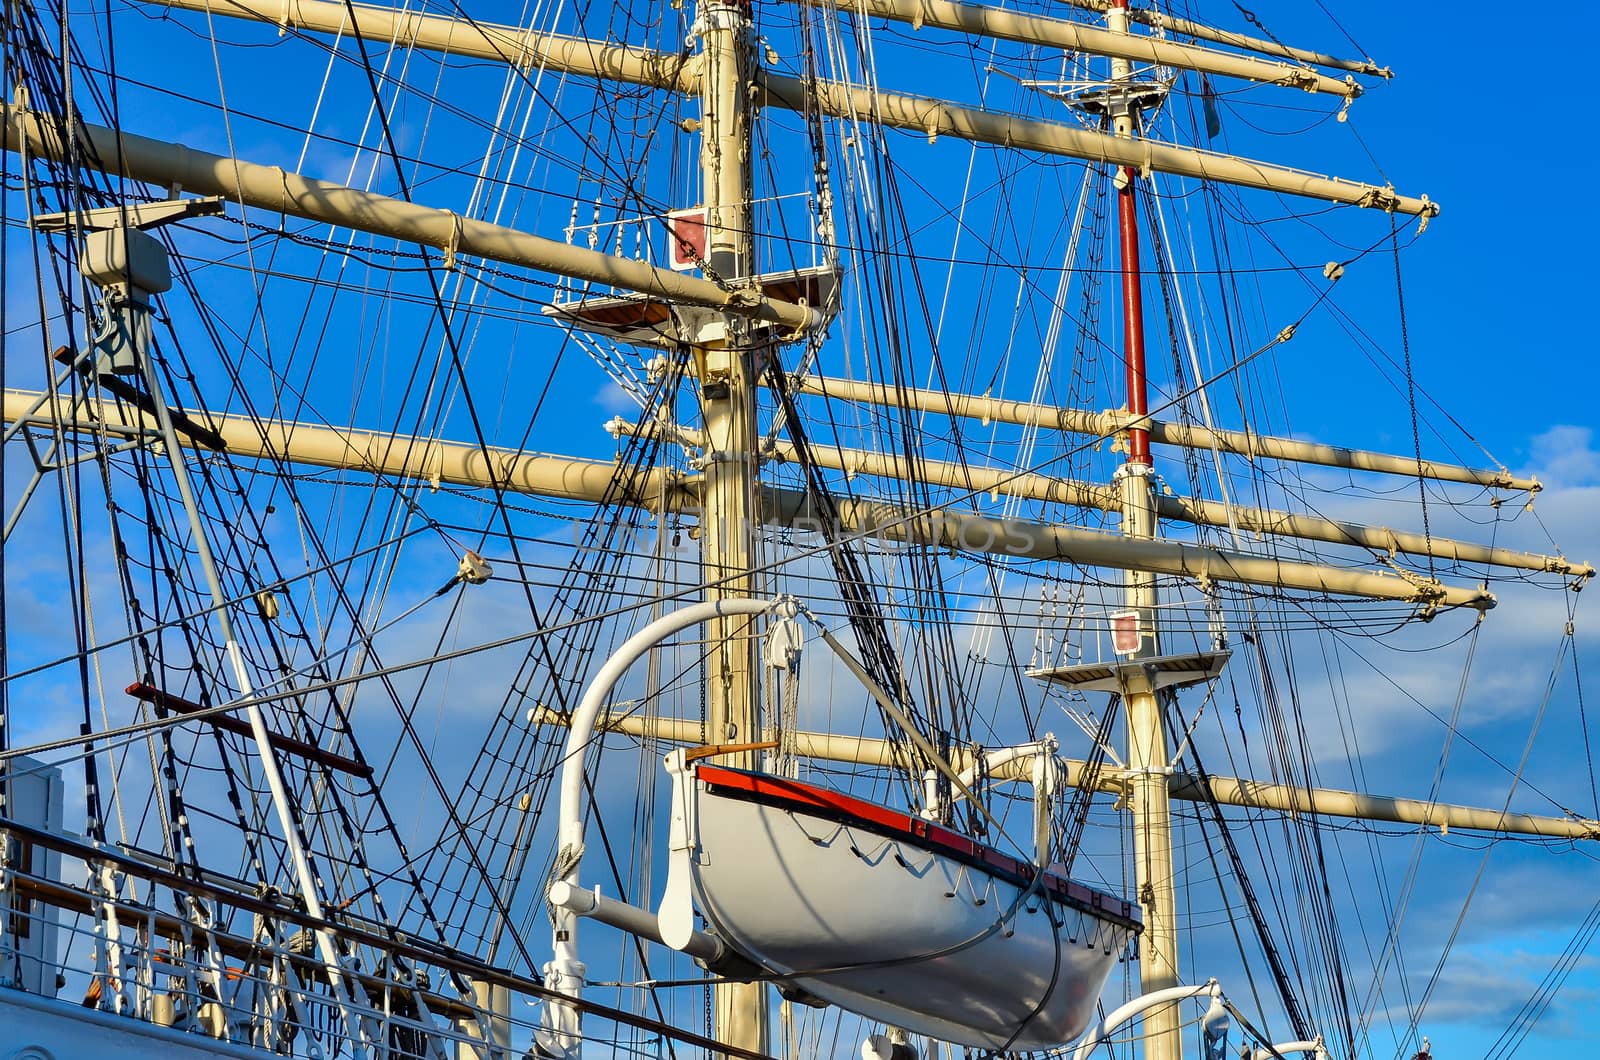 Crows nest, mast, and canvas sails can be seen in this closeup detail of an old time tall wooden sailing ship.